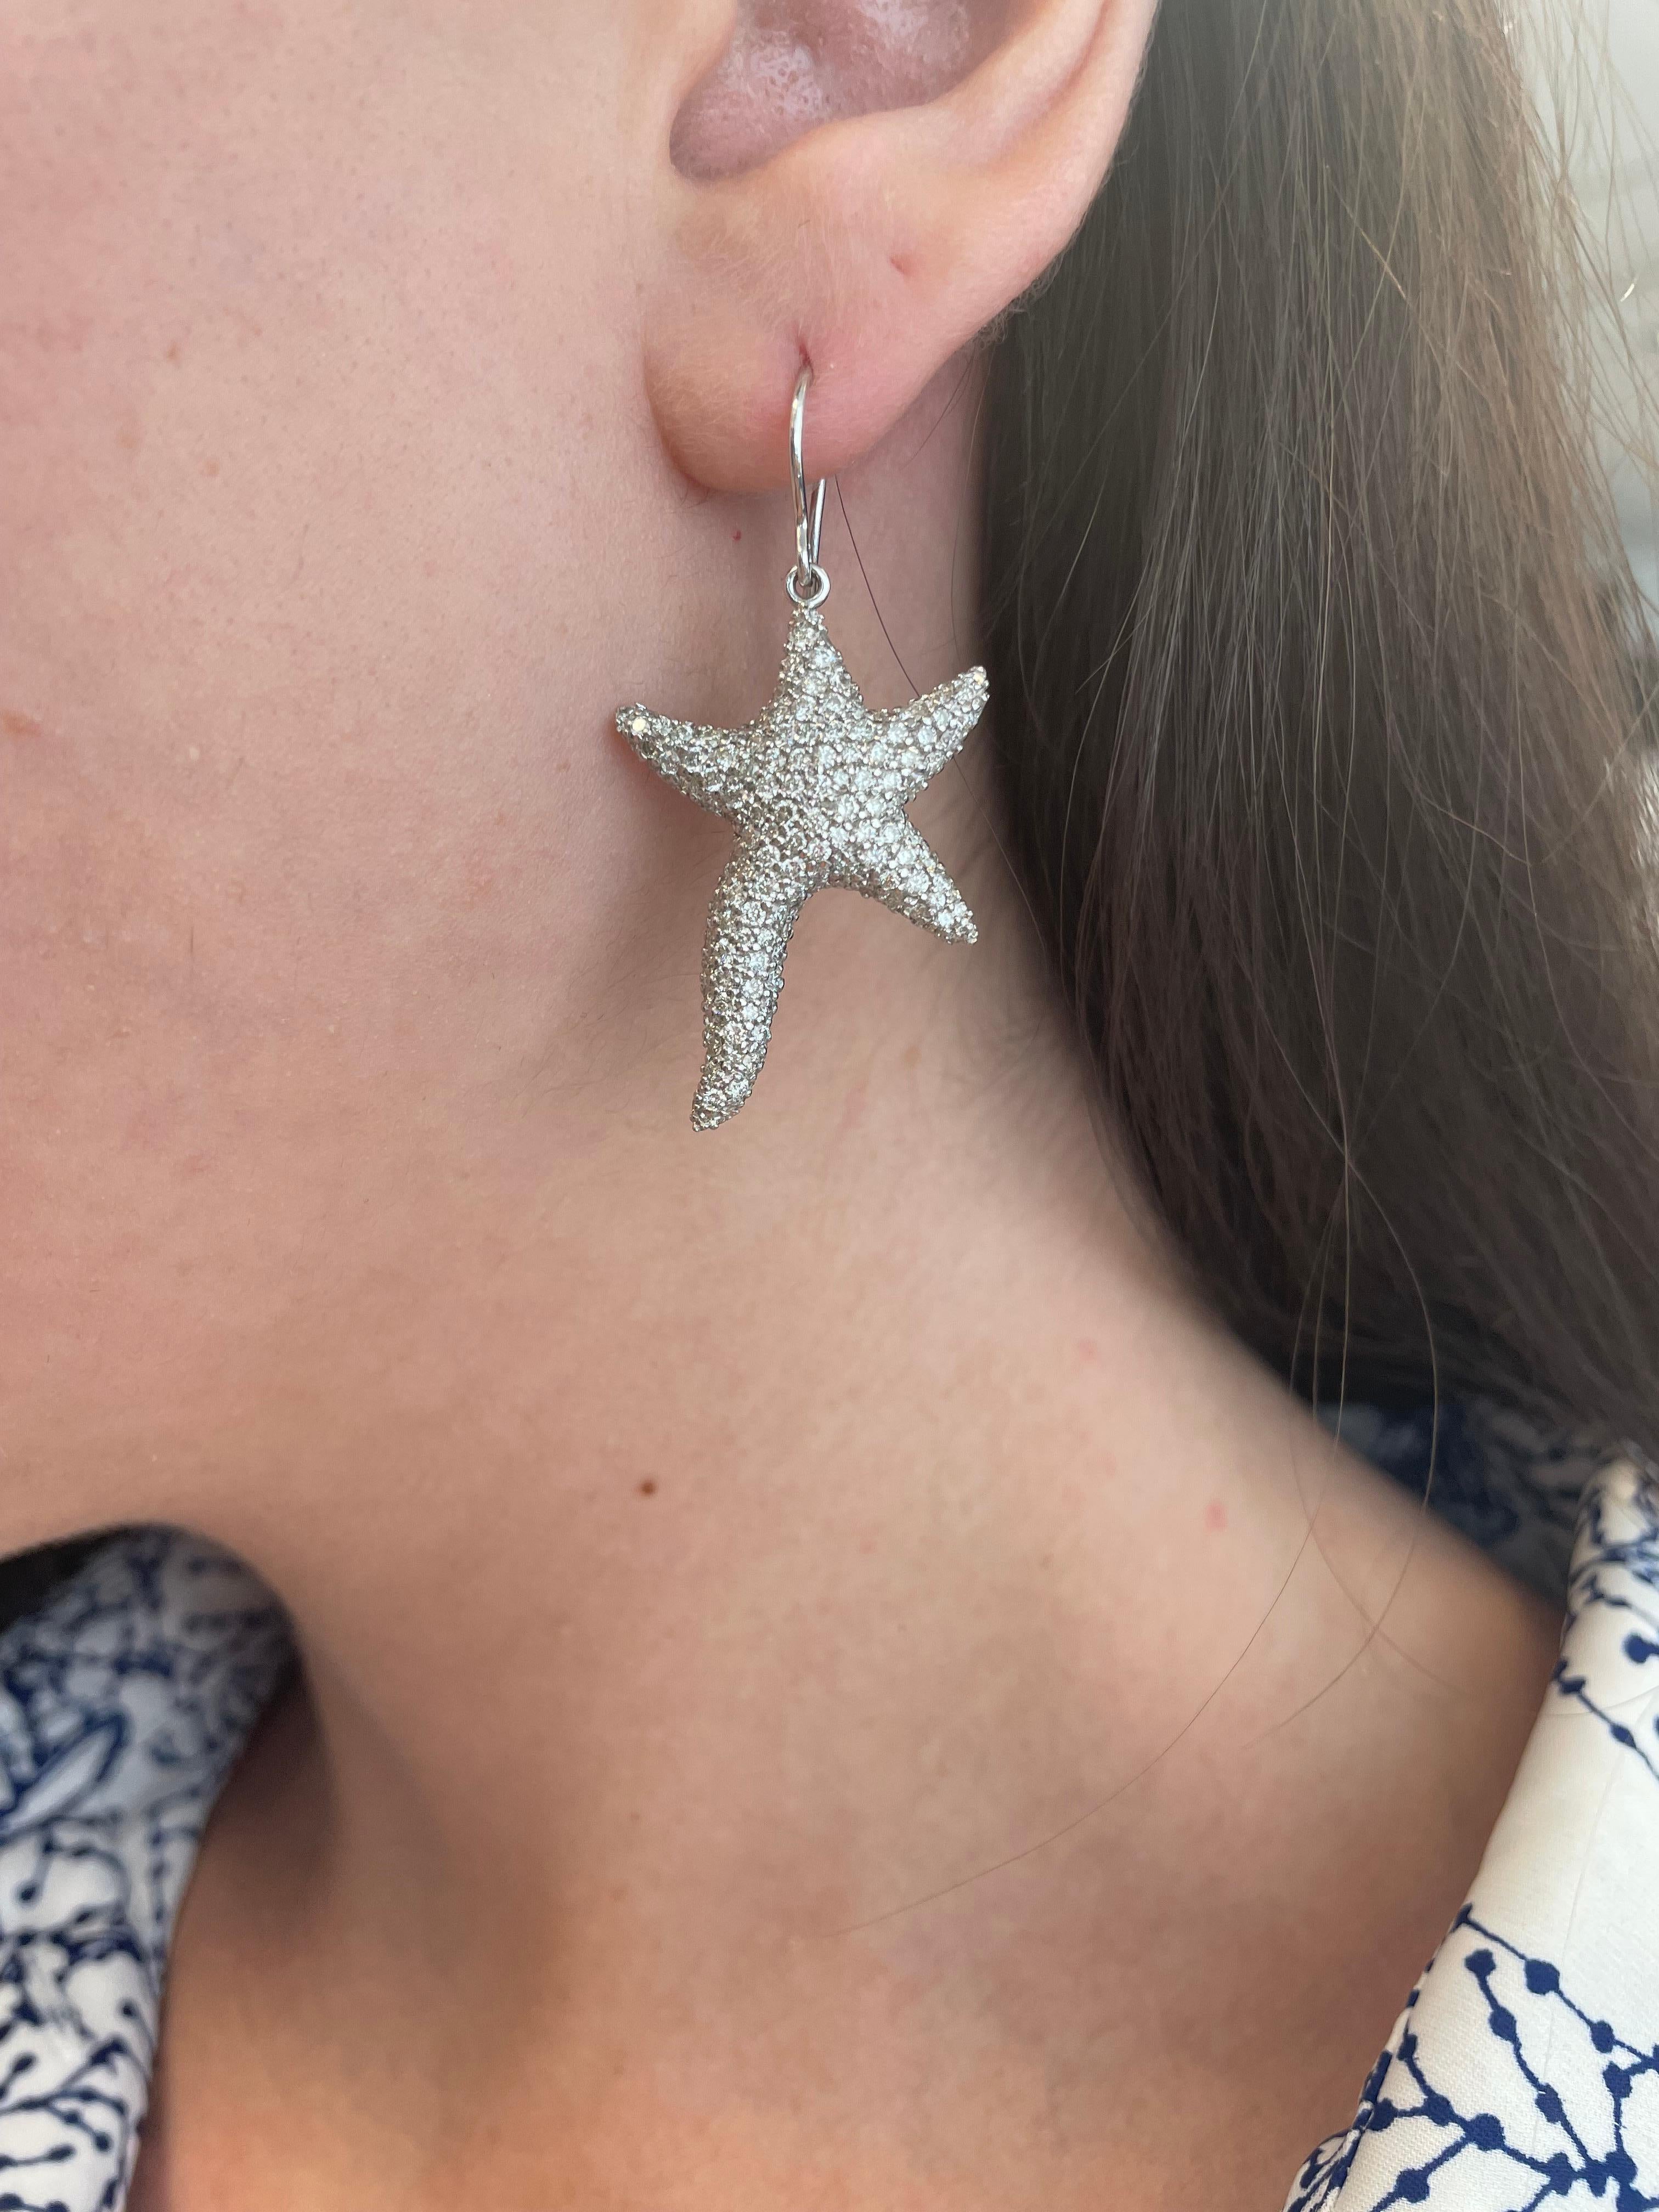 Beautiful pave set diamond starfish earrings.
4.58ct of round brilliant diamonds, approximately G/H color grade and SI clarity grade diamonds. 18-karat white gold. 
Accommodated with an up to date appraisal by a GIA G.G. upon request. please contact